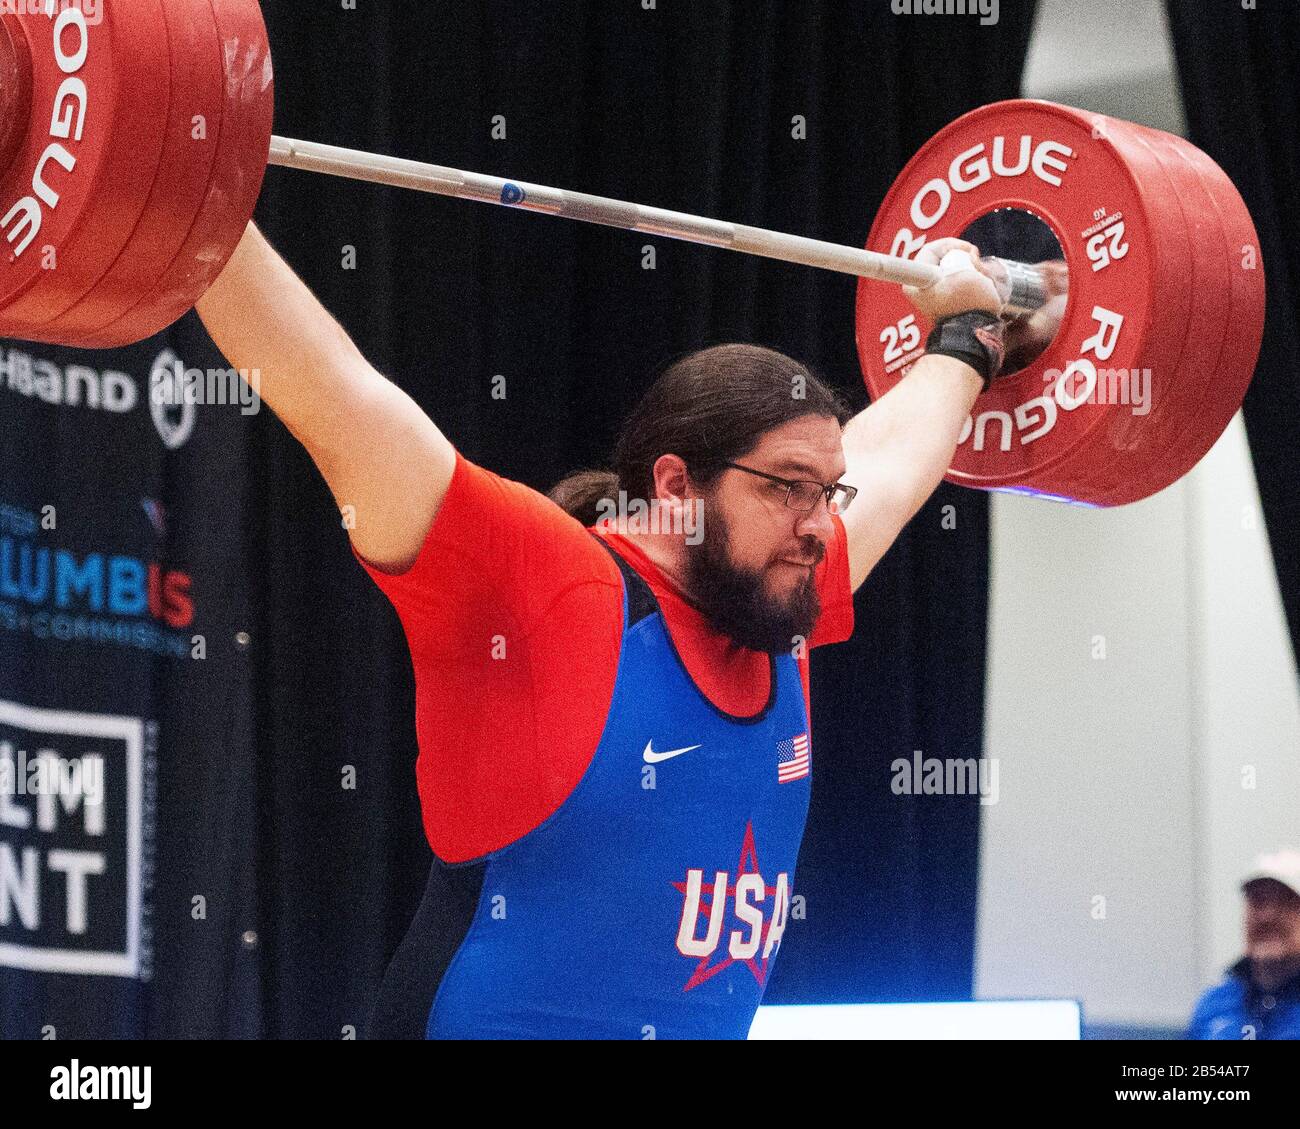 Columbus, Ohio, USA. 7th Mar, 2020. Caine Wilkes (USA) lifts 180 kgs. in the snatch in the IWF Rogue World Challenge in the Arnold Sports Festival in Columbus, Ohio, USA. Columbus, Ohio, USA. Credit: Brent Clark/Alamy Live News Stock Photo